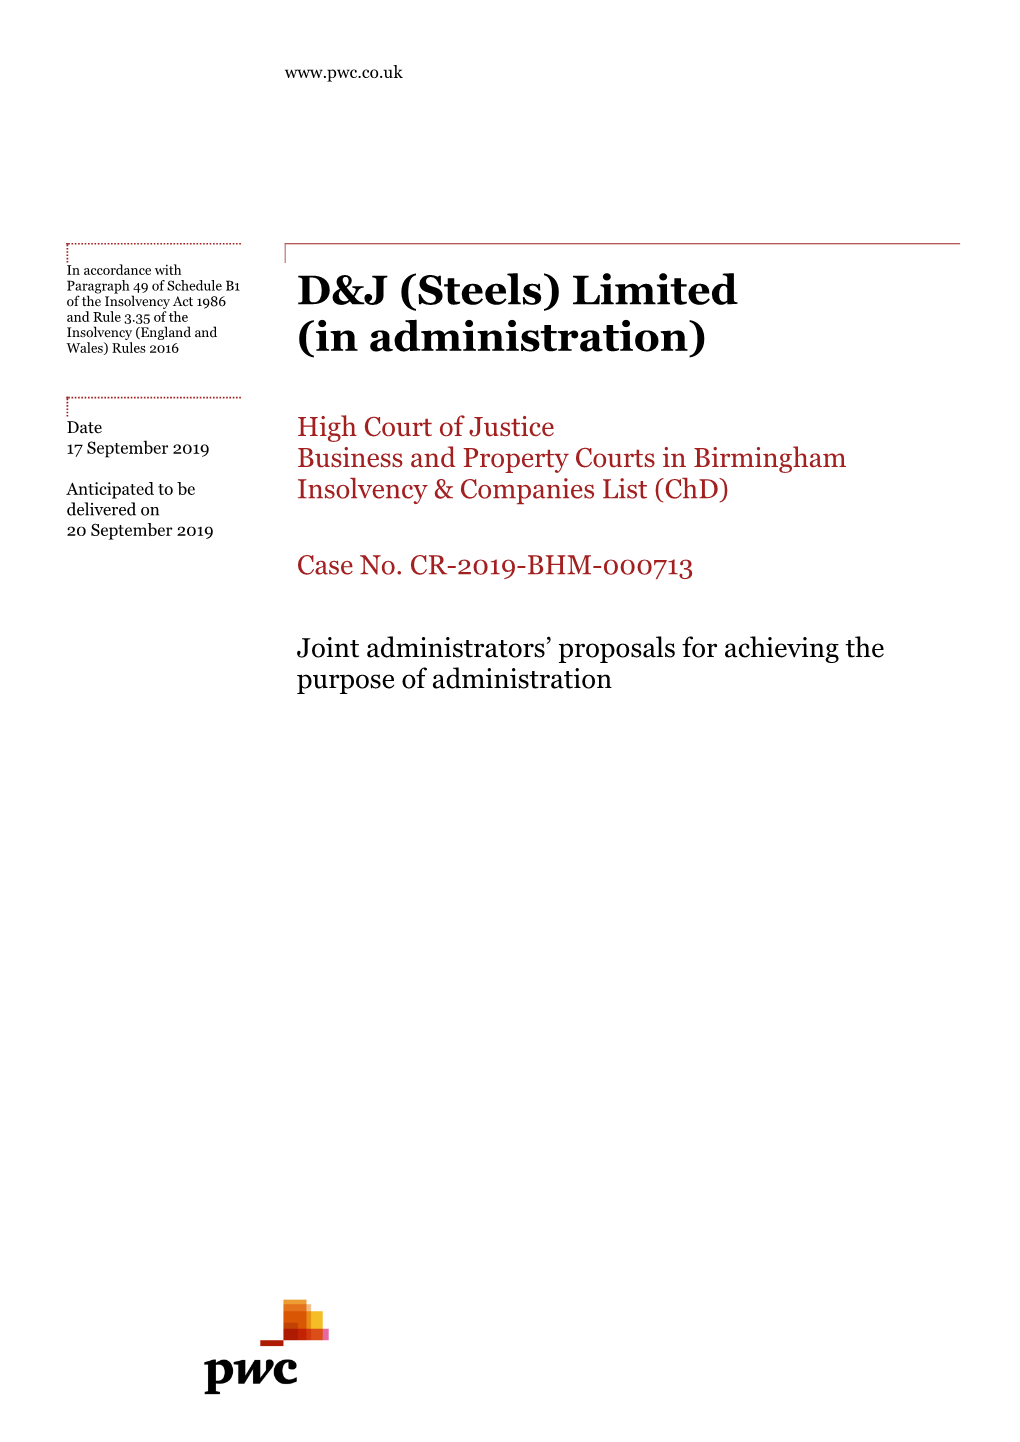 D&J (Steels) Limited (In Administration)